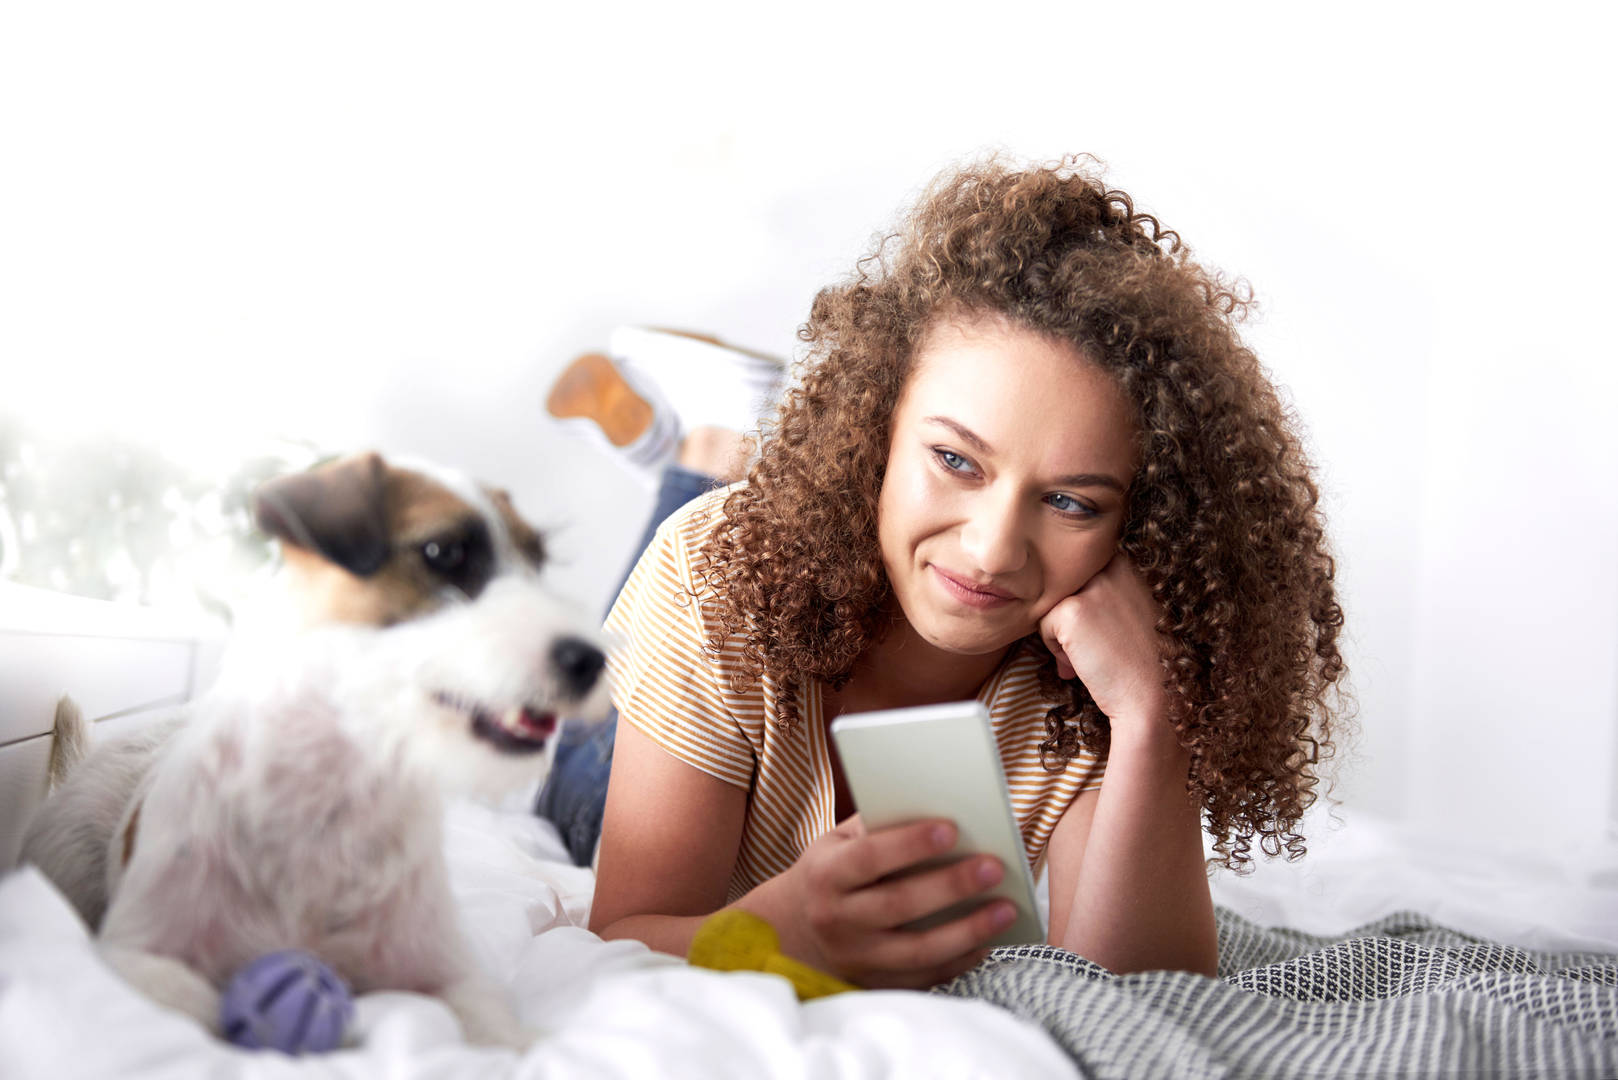 Woman looks at phone with her dog